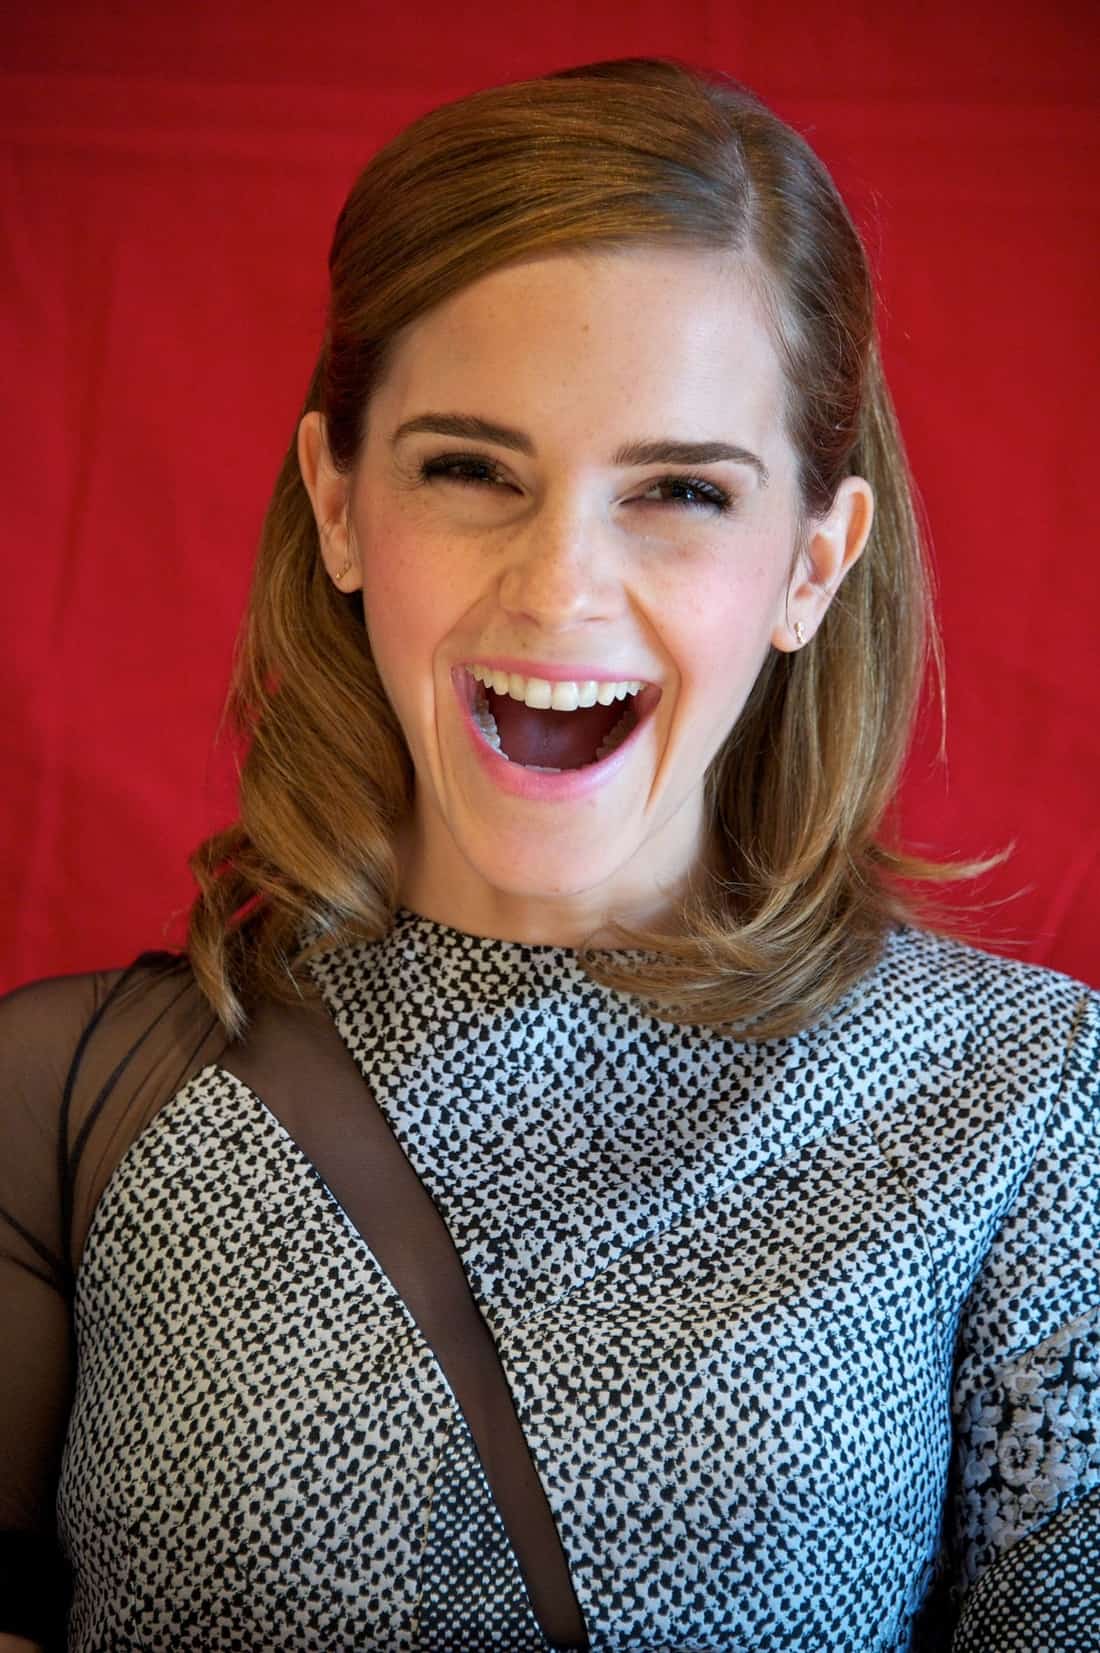 Emma Watson Oozes Beauty at the "The Bling Ring" Photocall and Conference